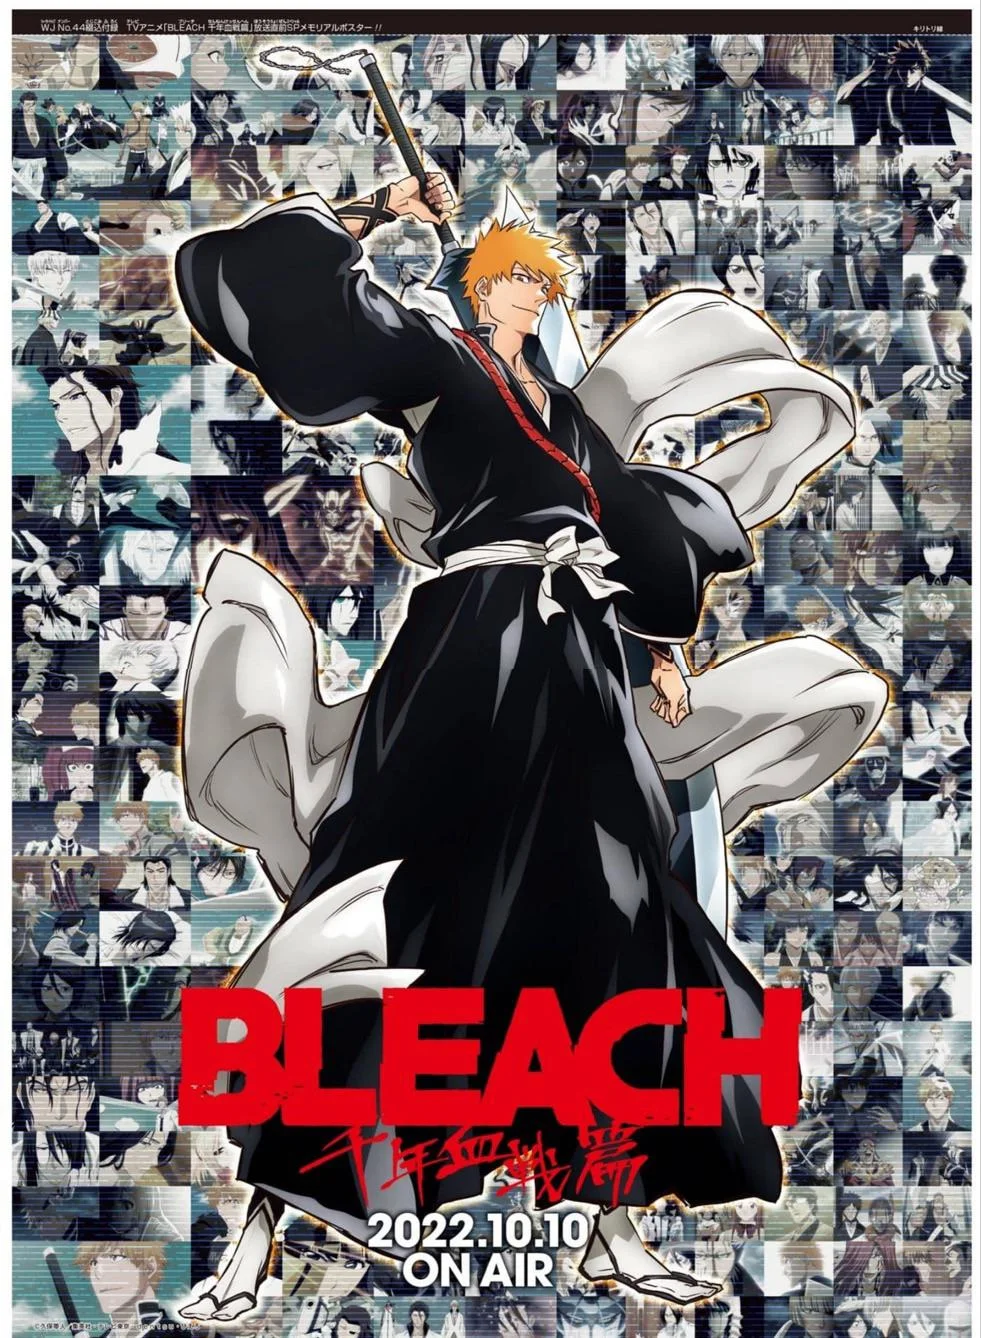 Bleach Thousand-Year Blood War Release Time, Date, & How To Watch